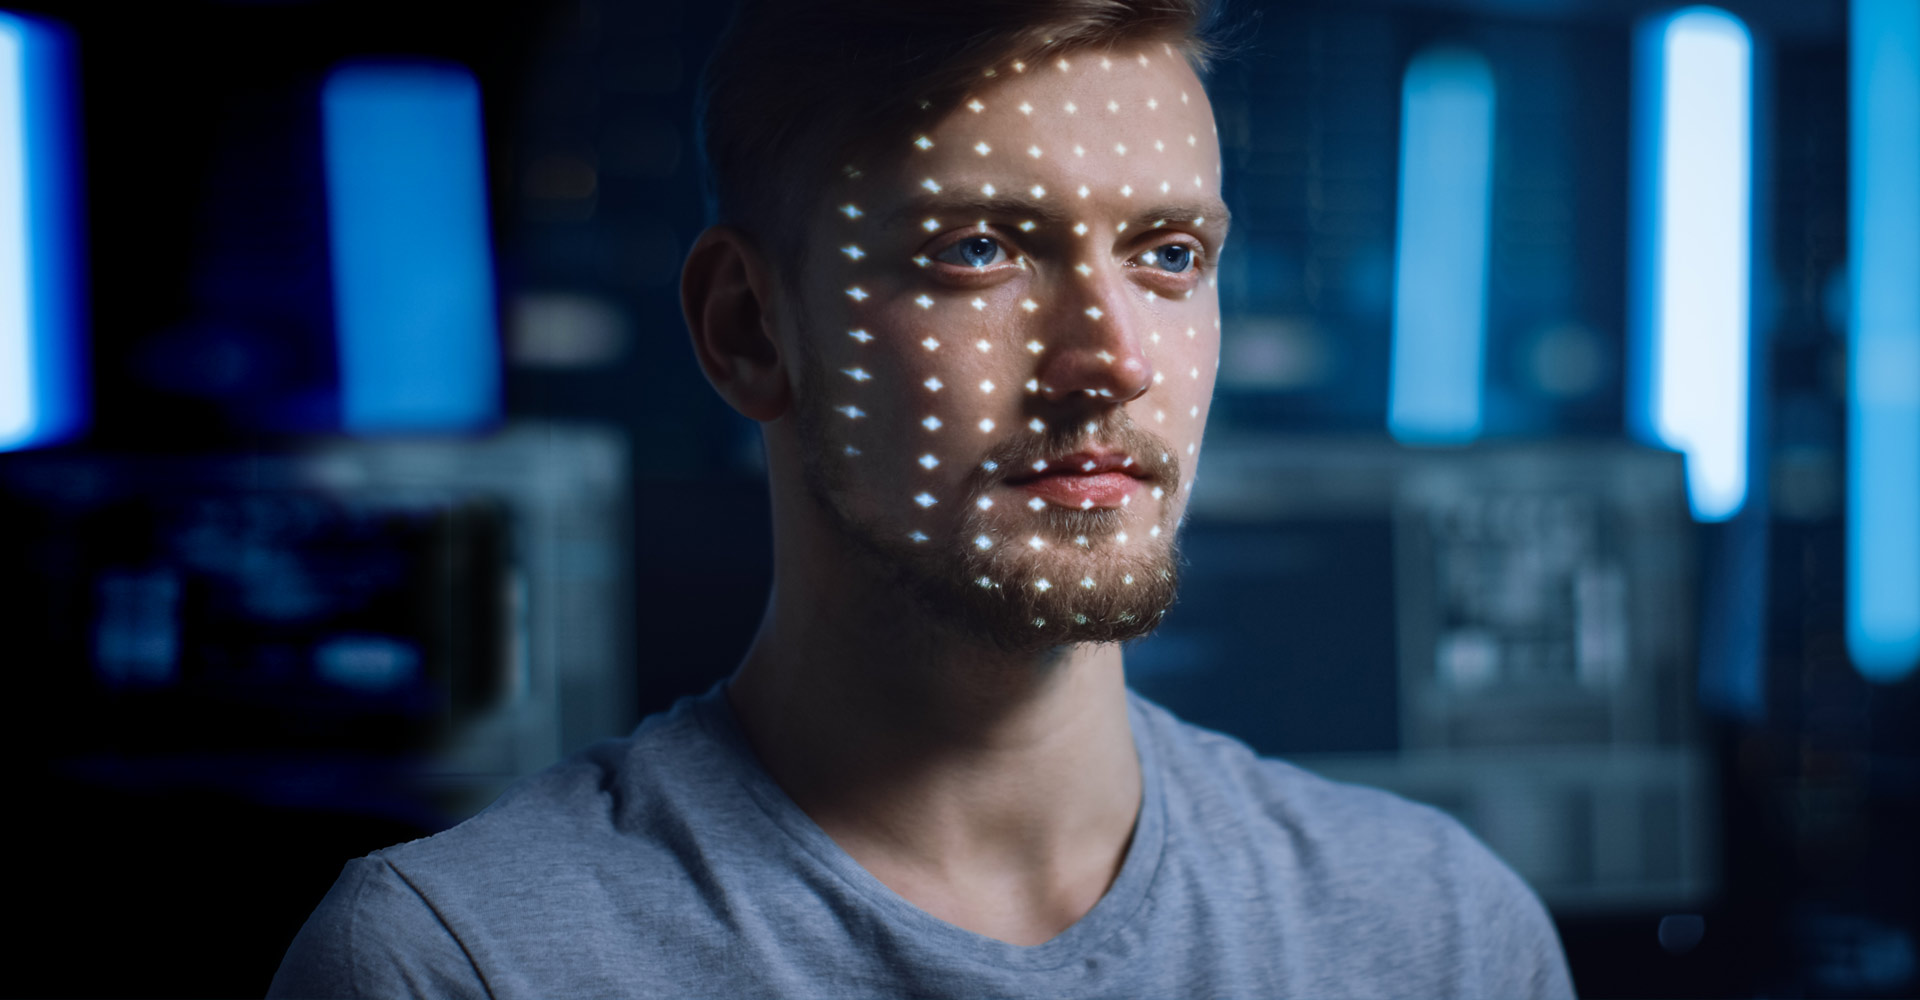 Facebook Shuts Down Facial Recognition | Avast